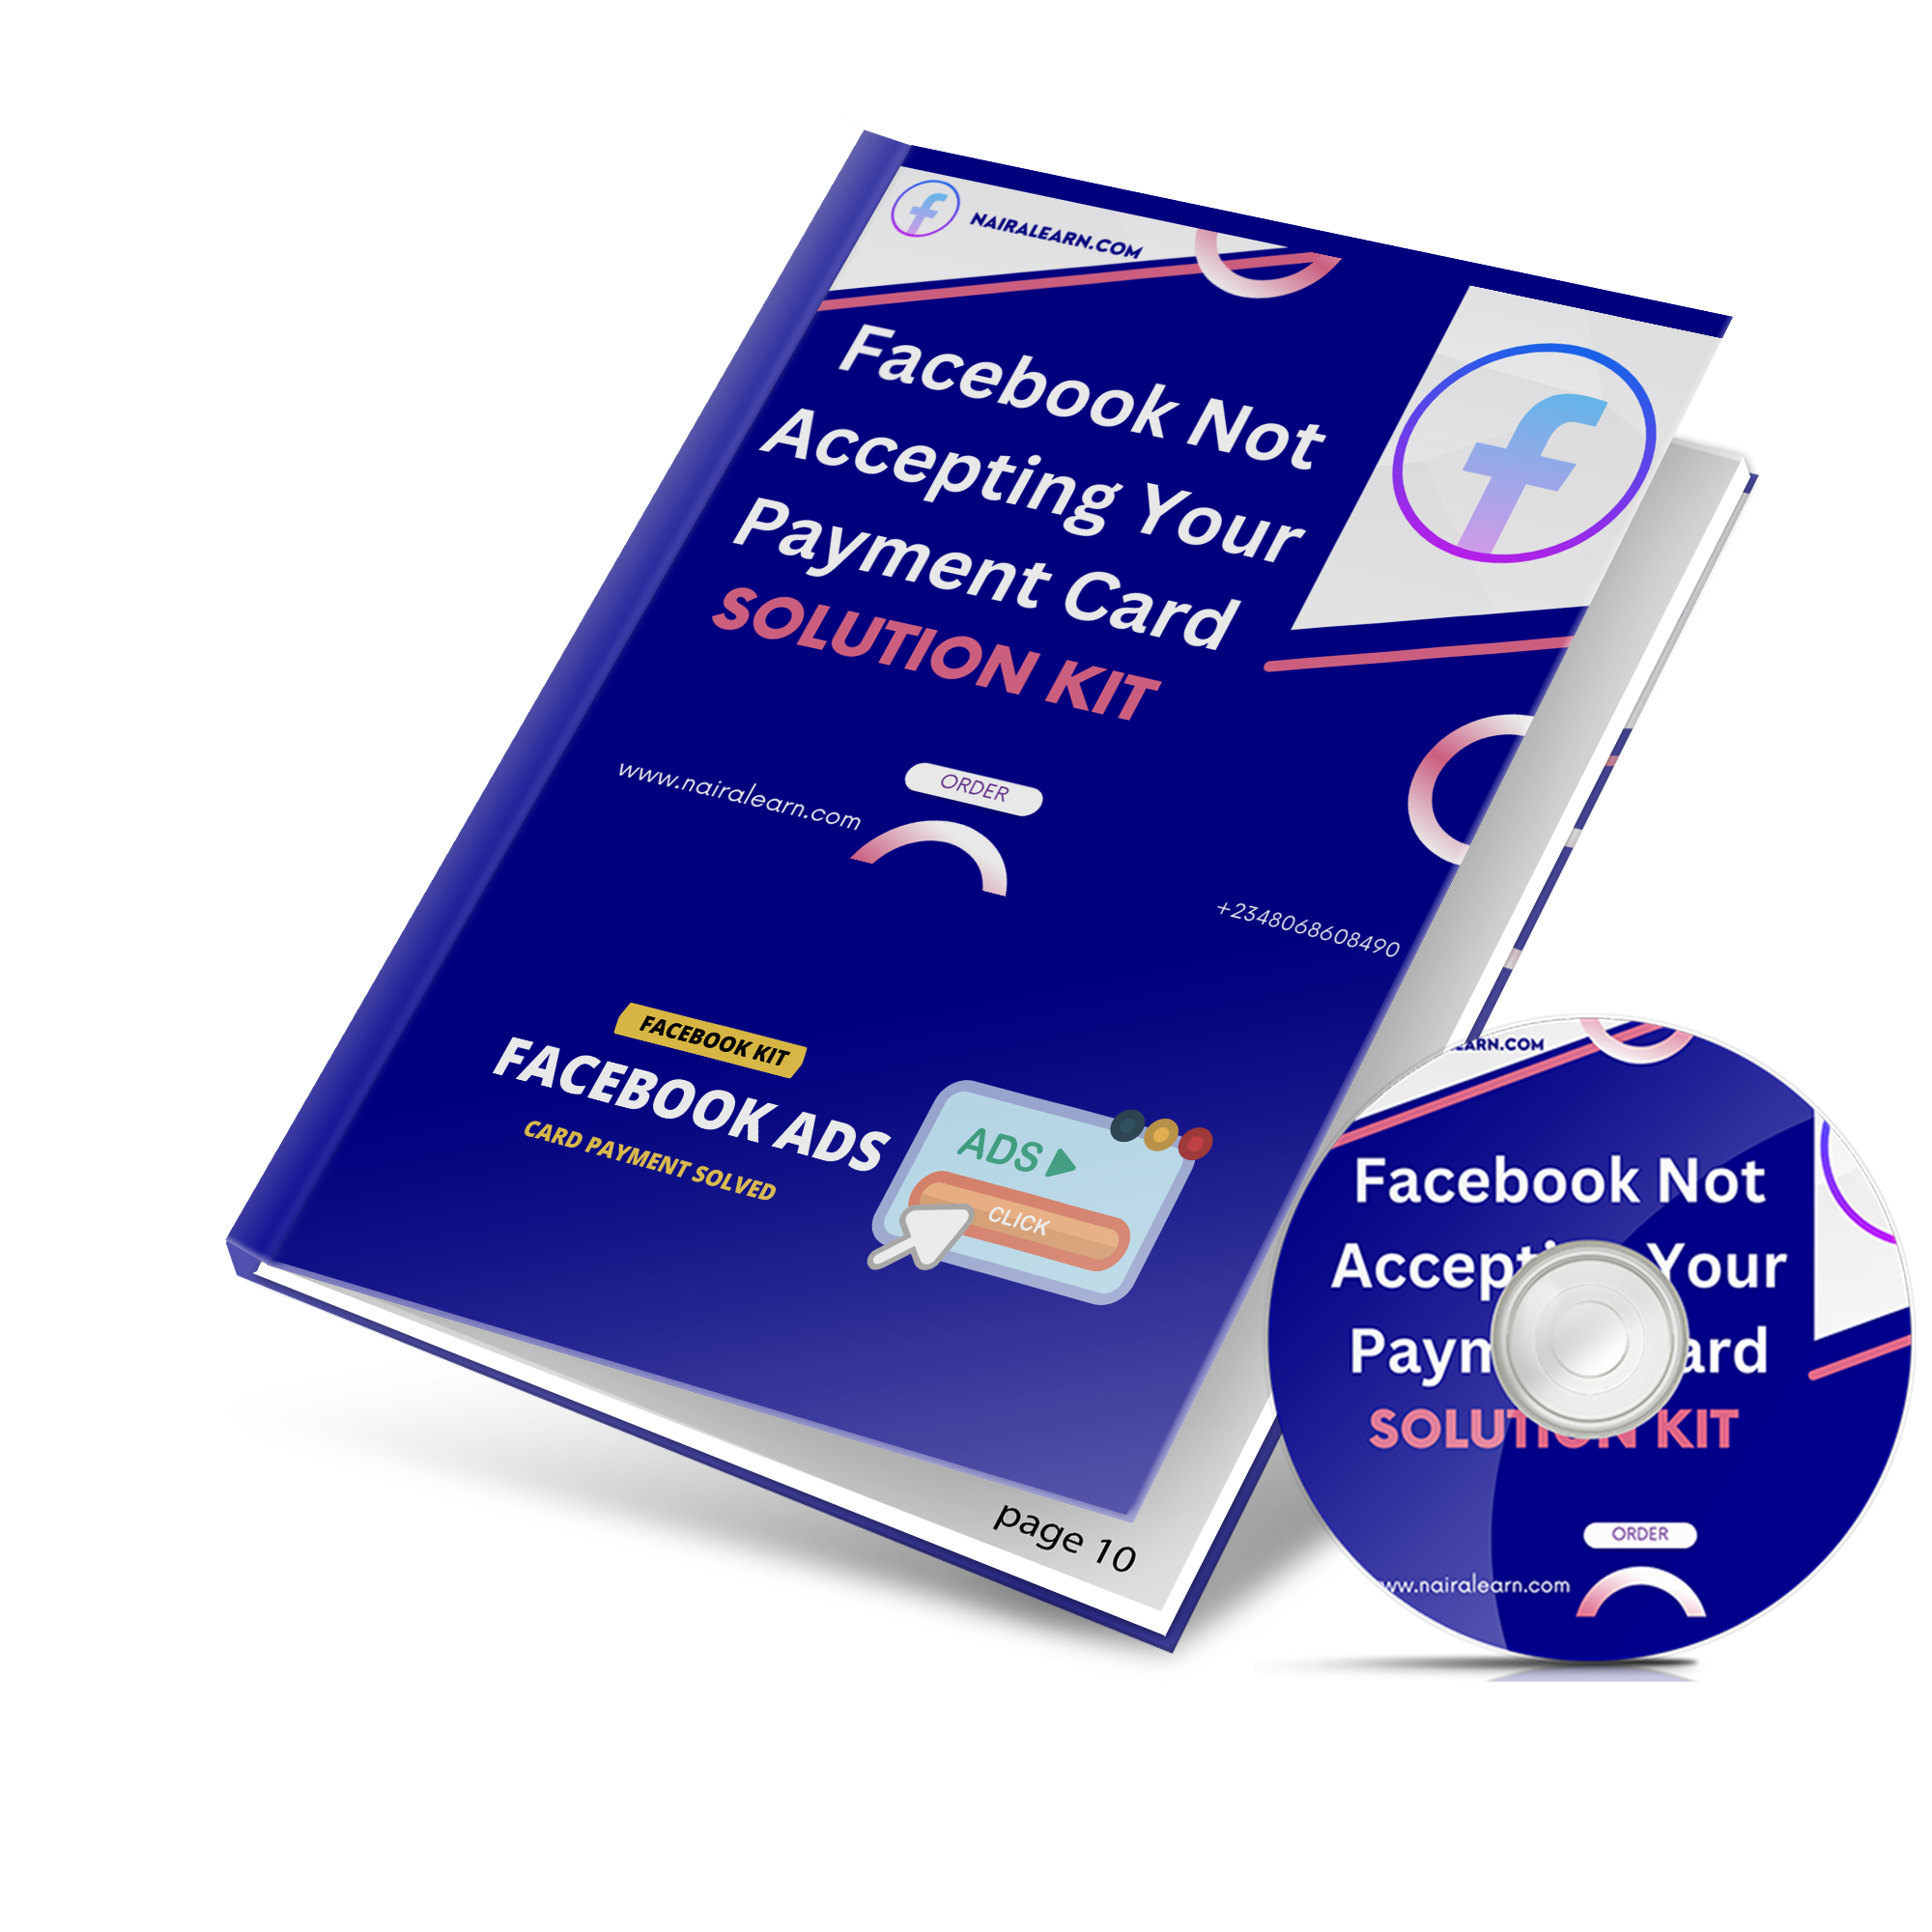 Facebook Not Accepting Your Payment Card solved